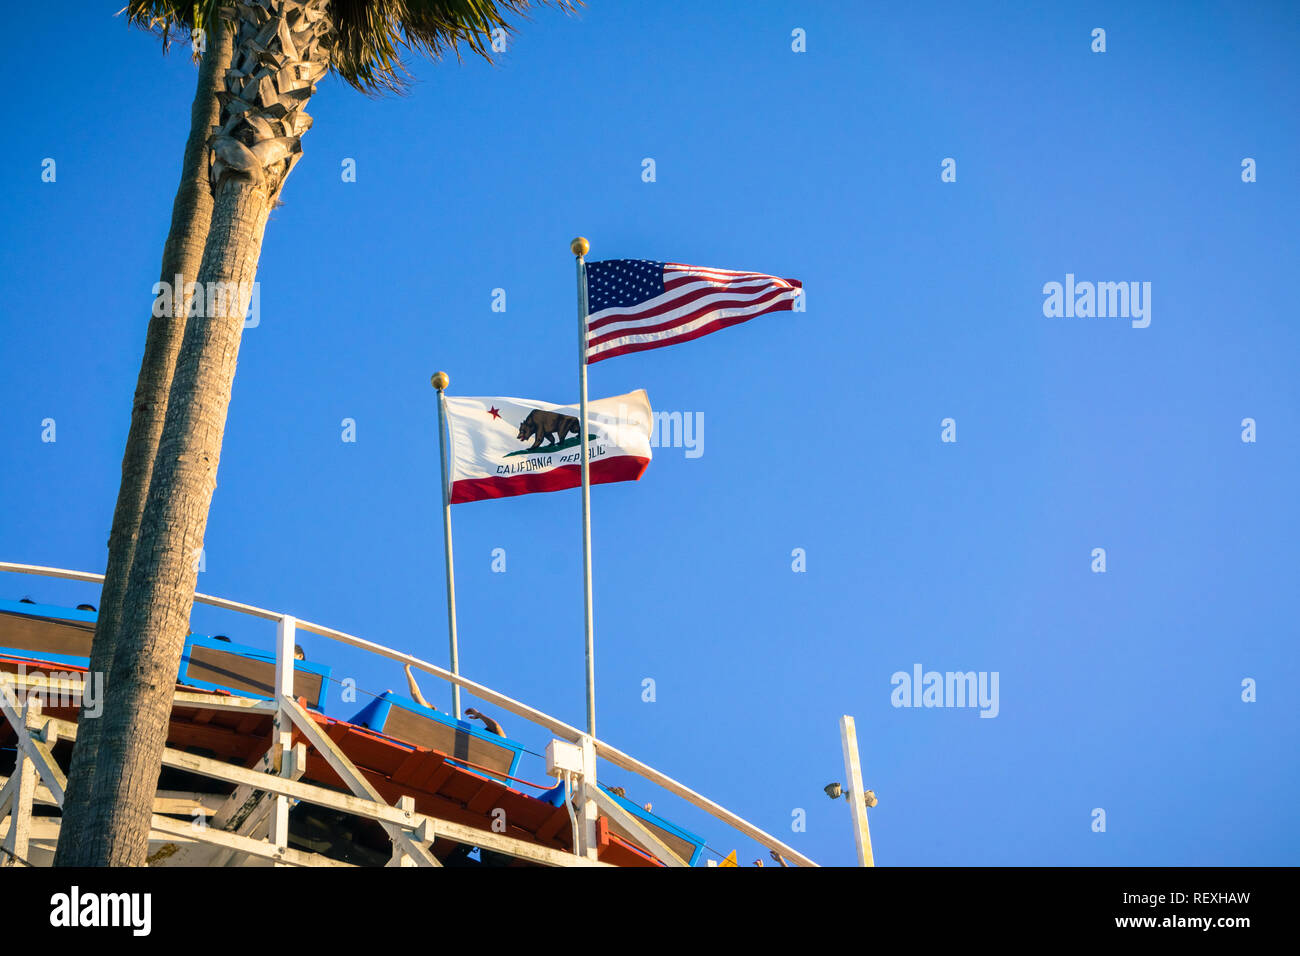 July 8, 2017 Santa Cruz/CA/USA - The USA flag and the California Republic flag blowing in the wind on top of a roller coaster on a blue sky background Stock Photo